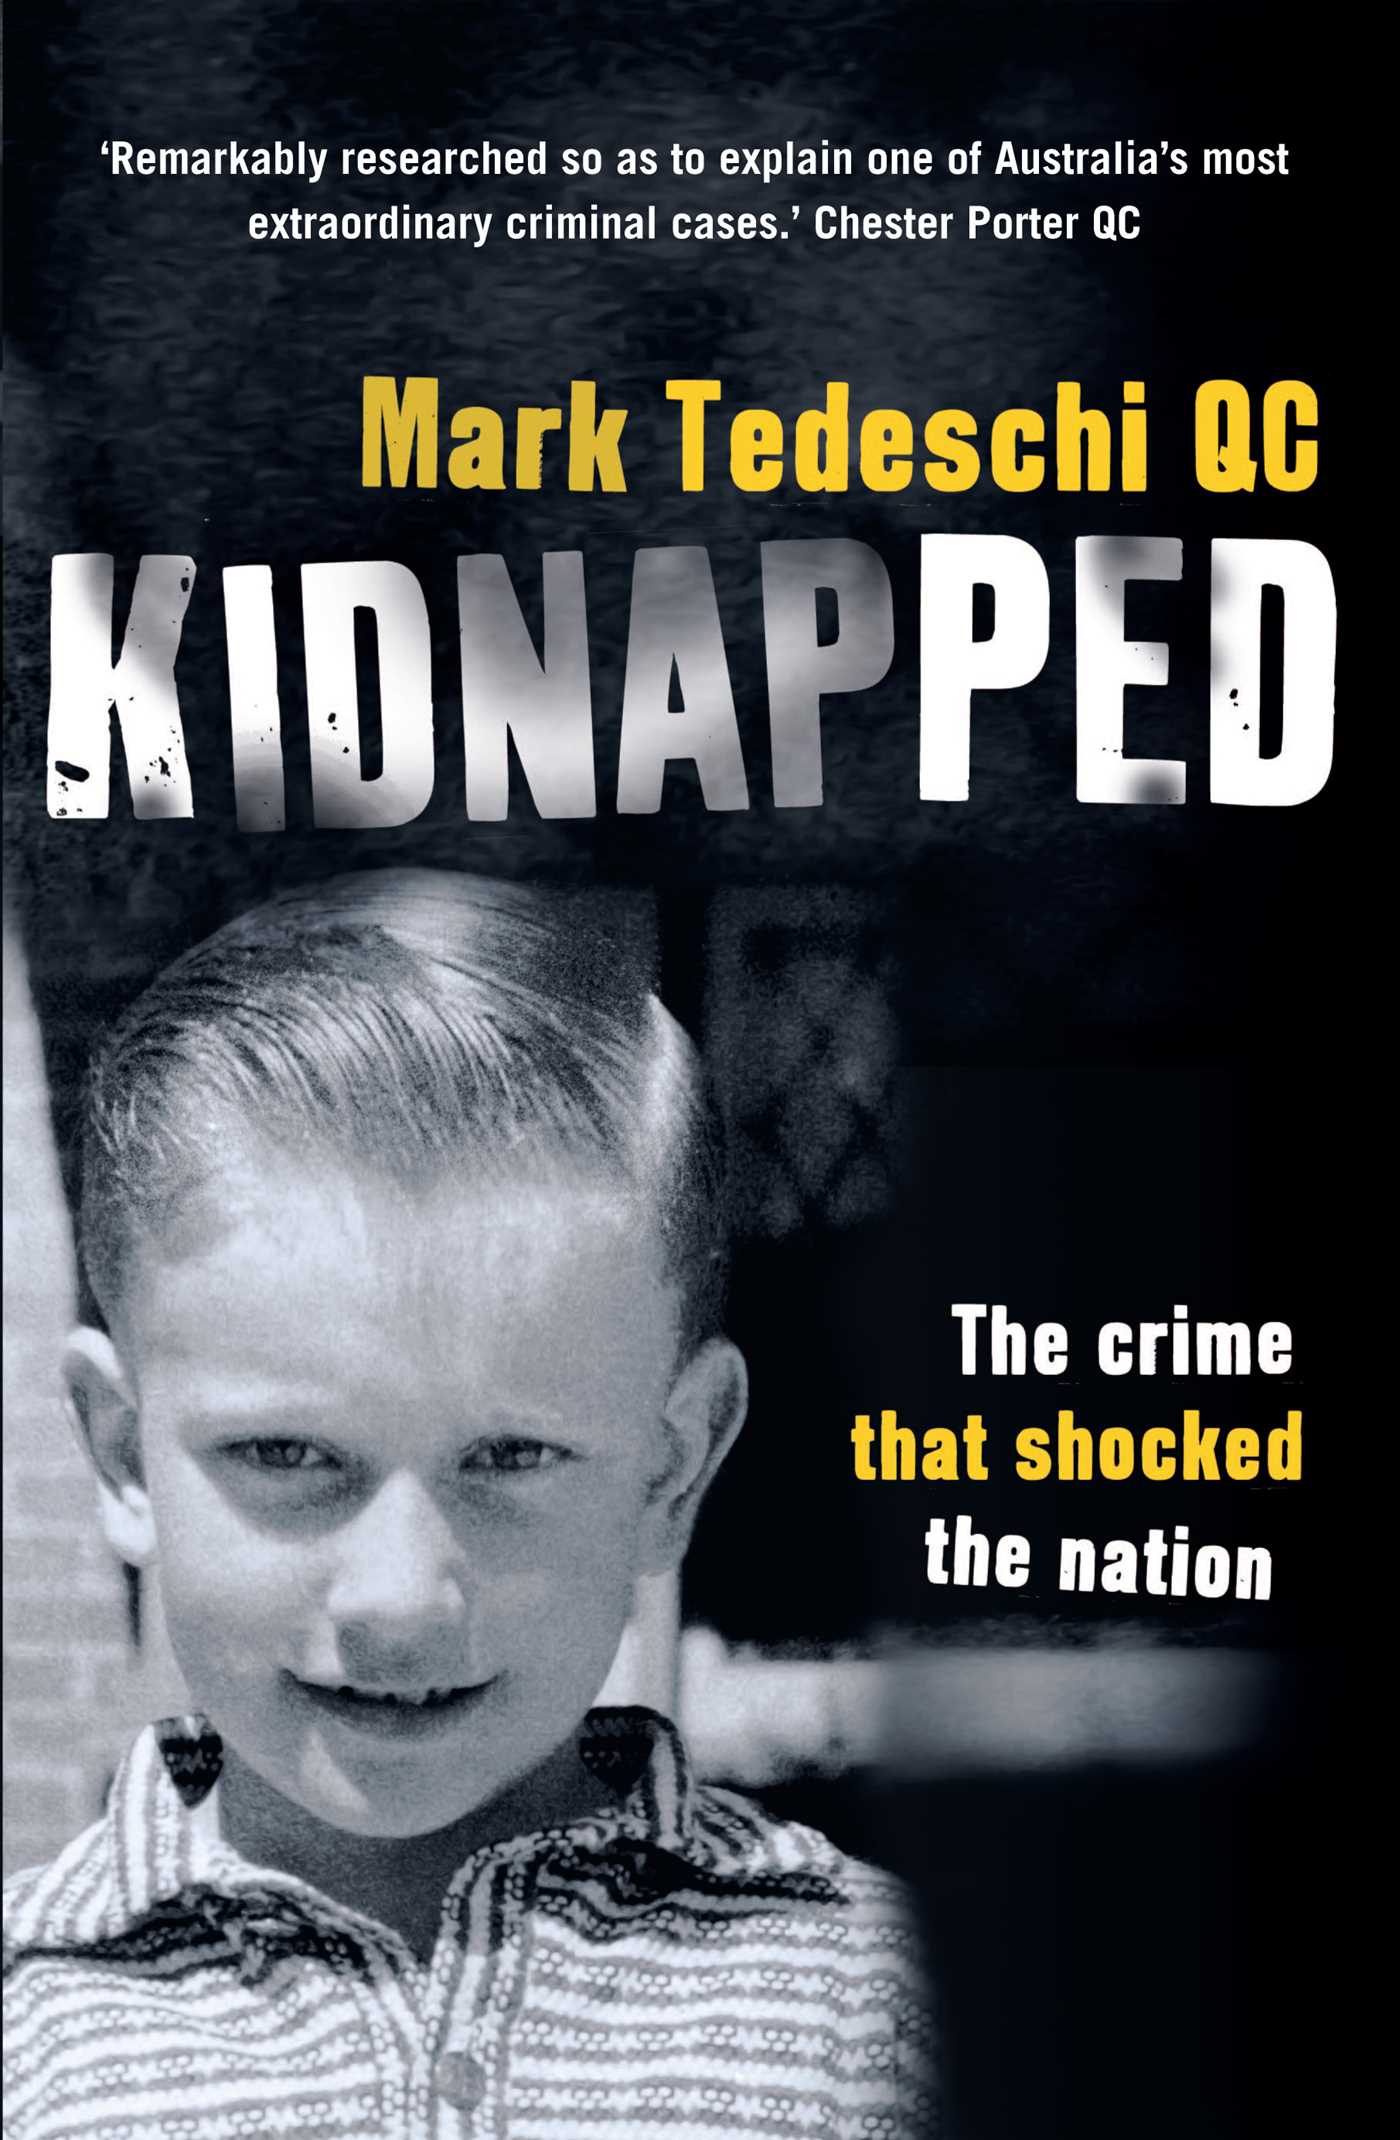 Kidnapped: The crime that shocked the nation by Mark Tedeschi QC